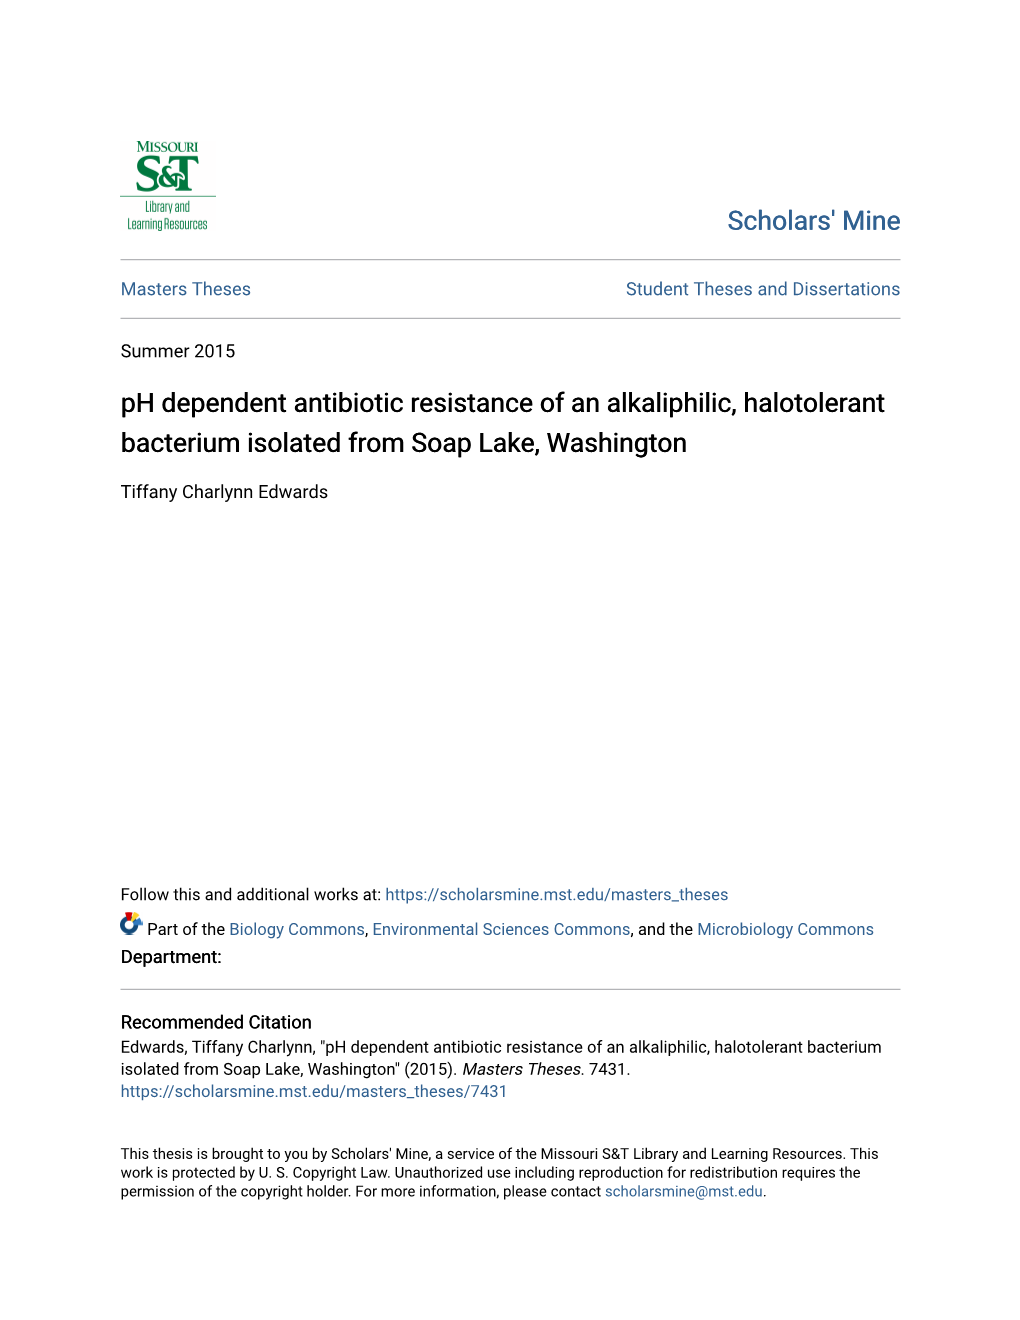 Ph Dependent Antibiotic Resistance of an Alkaliphilic, Halotolerant Bacterium Isolated from Soap Lake, Washington